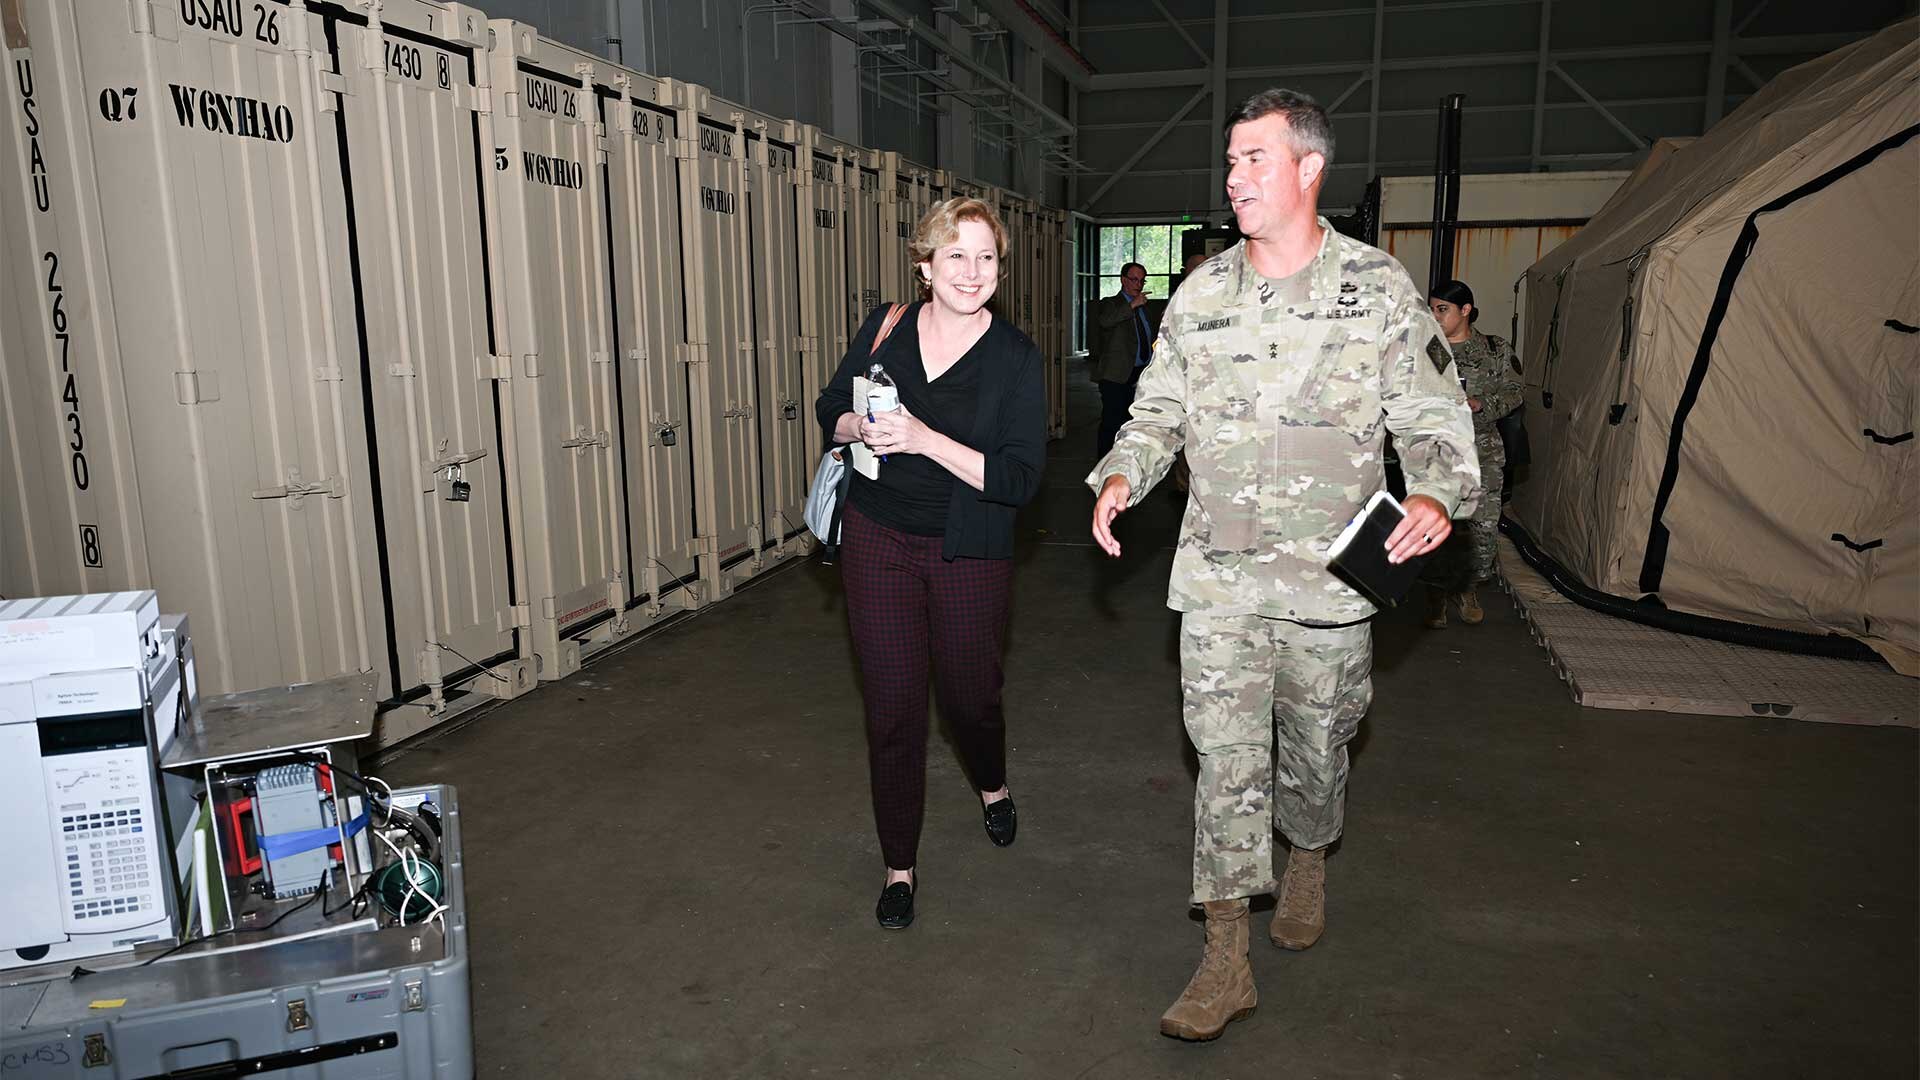 Strengthening Partnerships in Nuclear Deterrence: the 20th CBRNE Commanding General and Nuclear Disablement Team hosts DTRA Director.